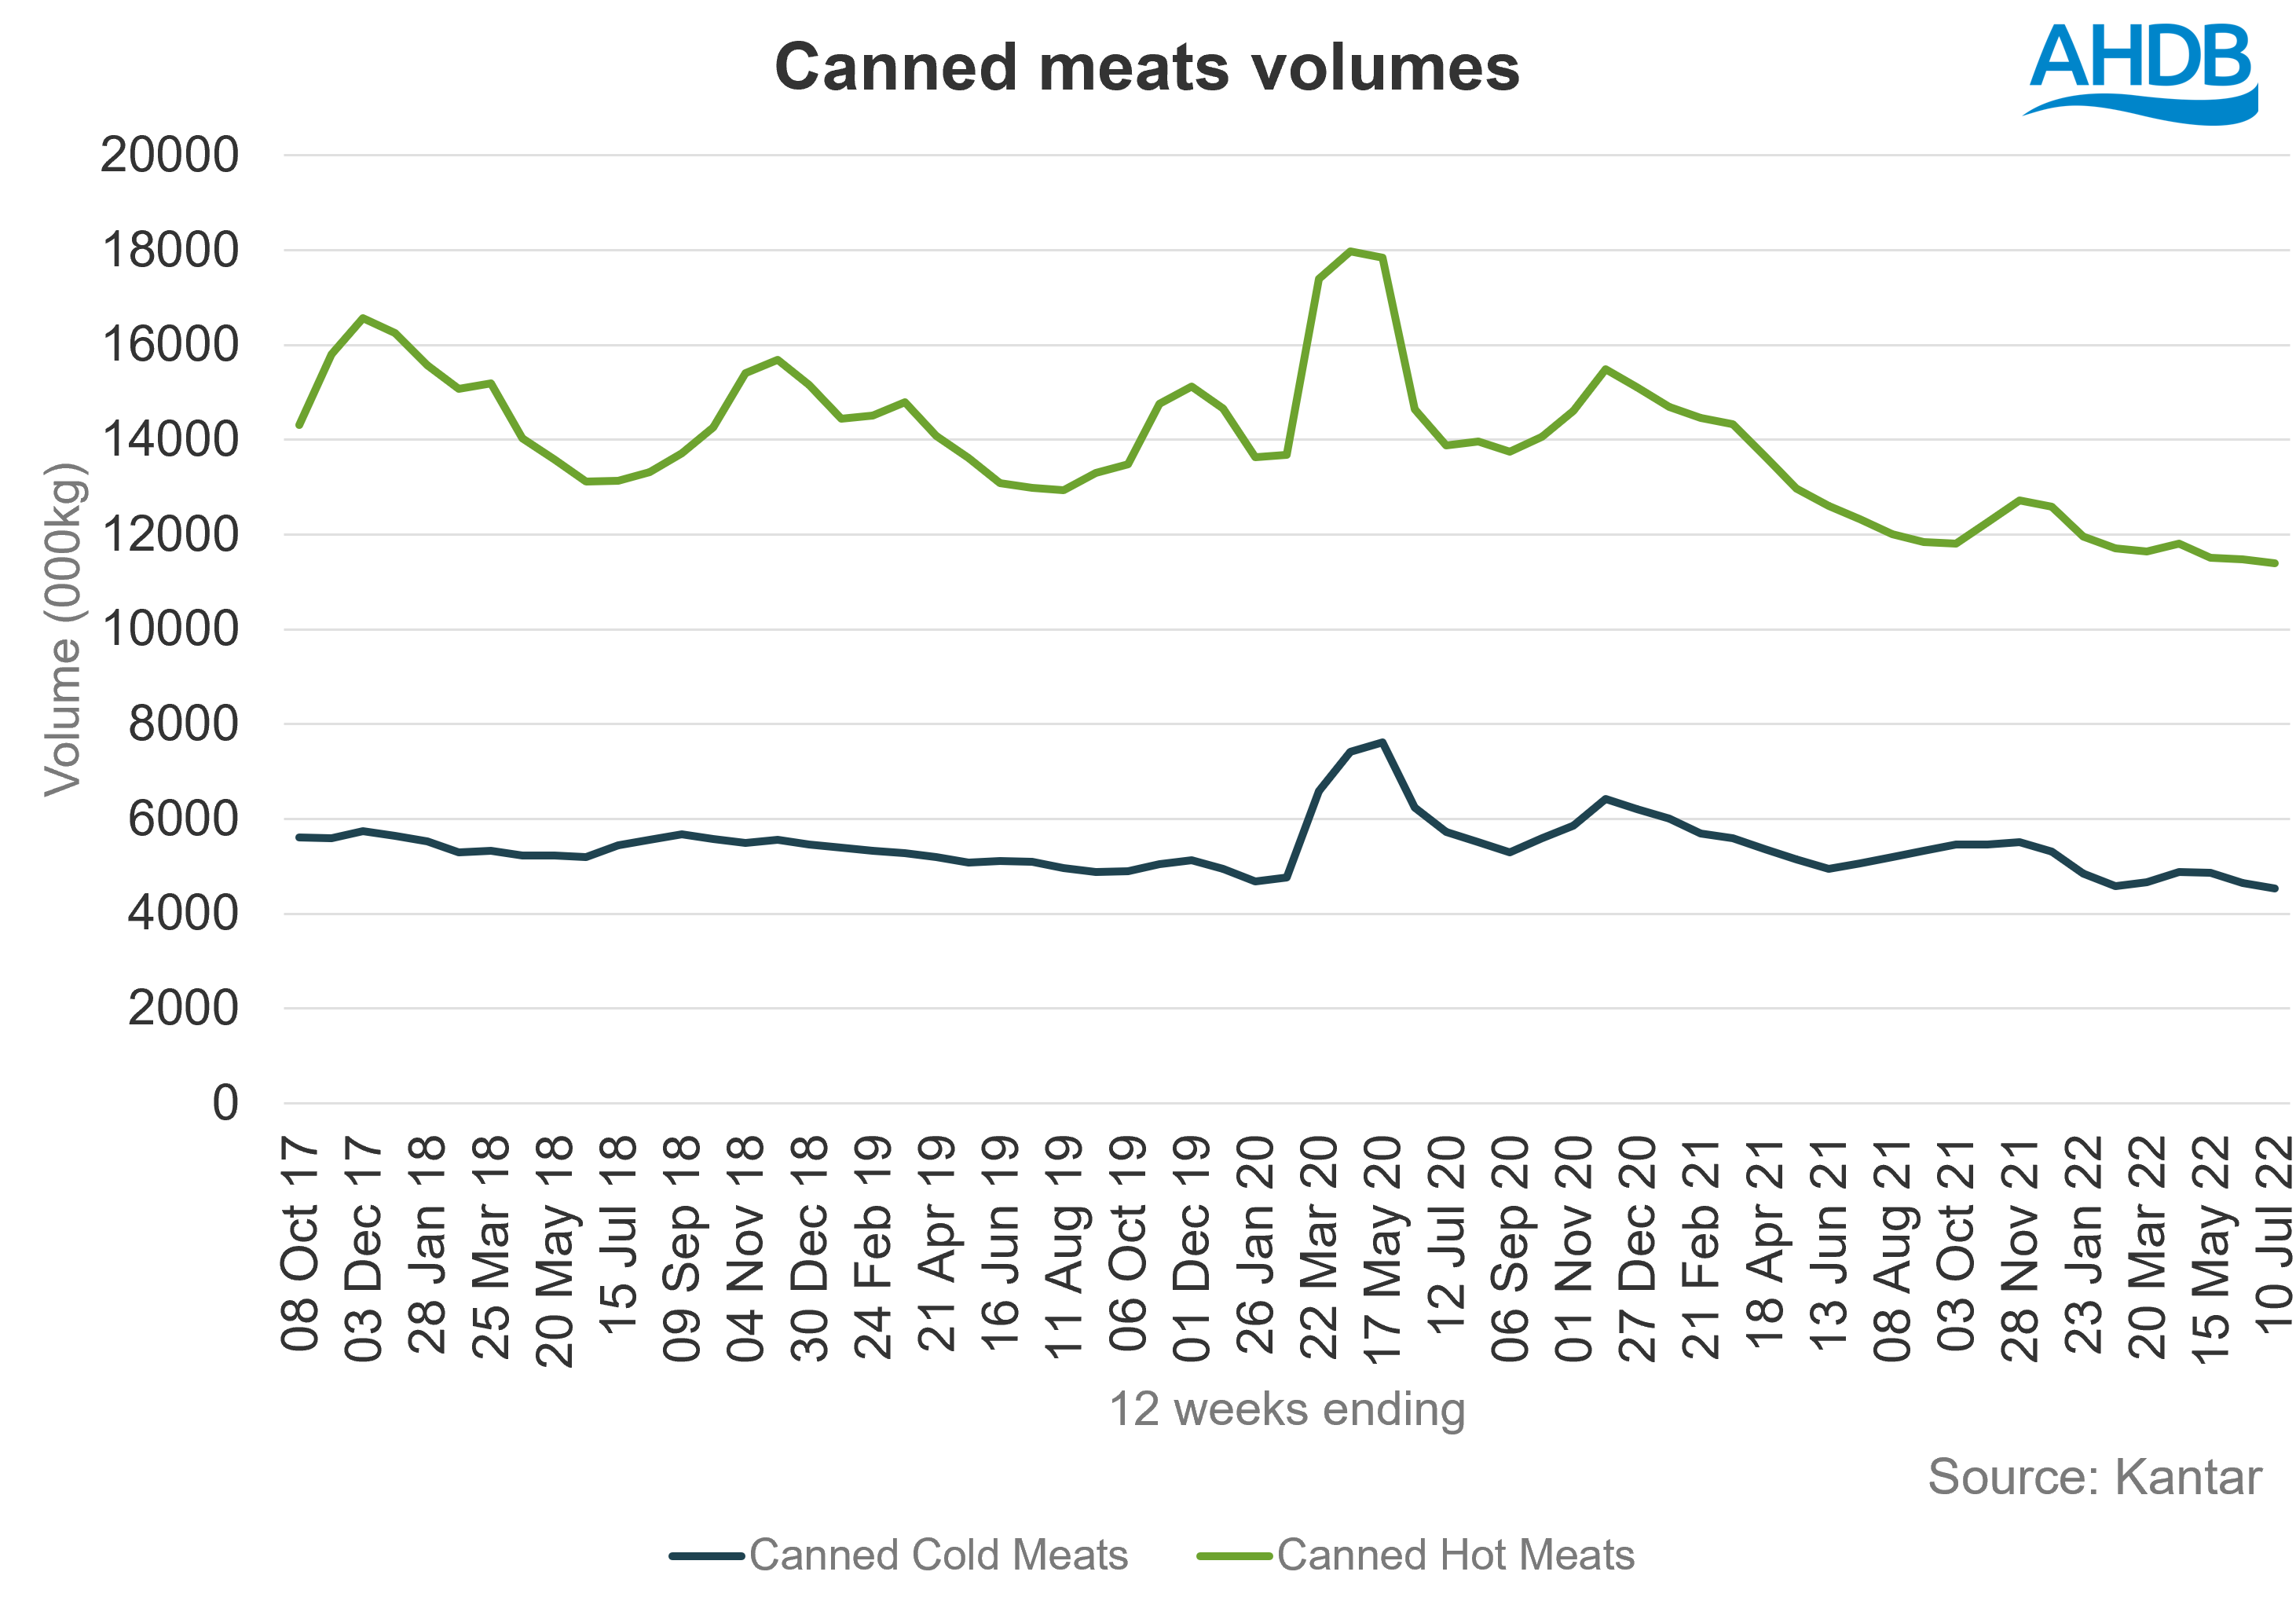 Chart showing canned meat retail volumes